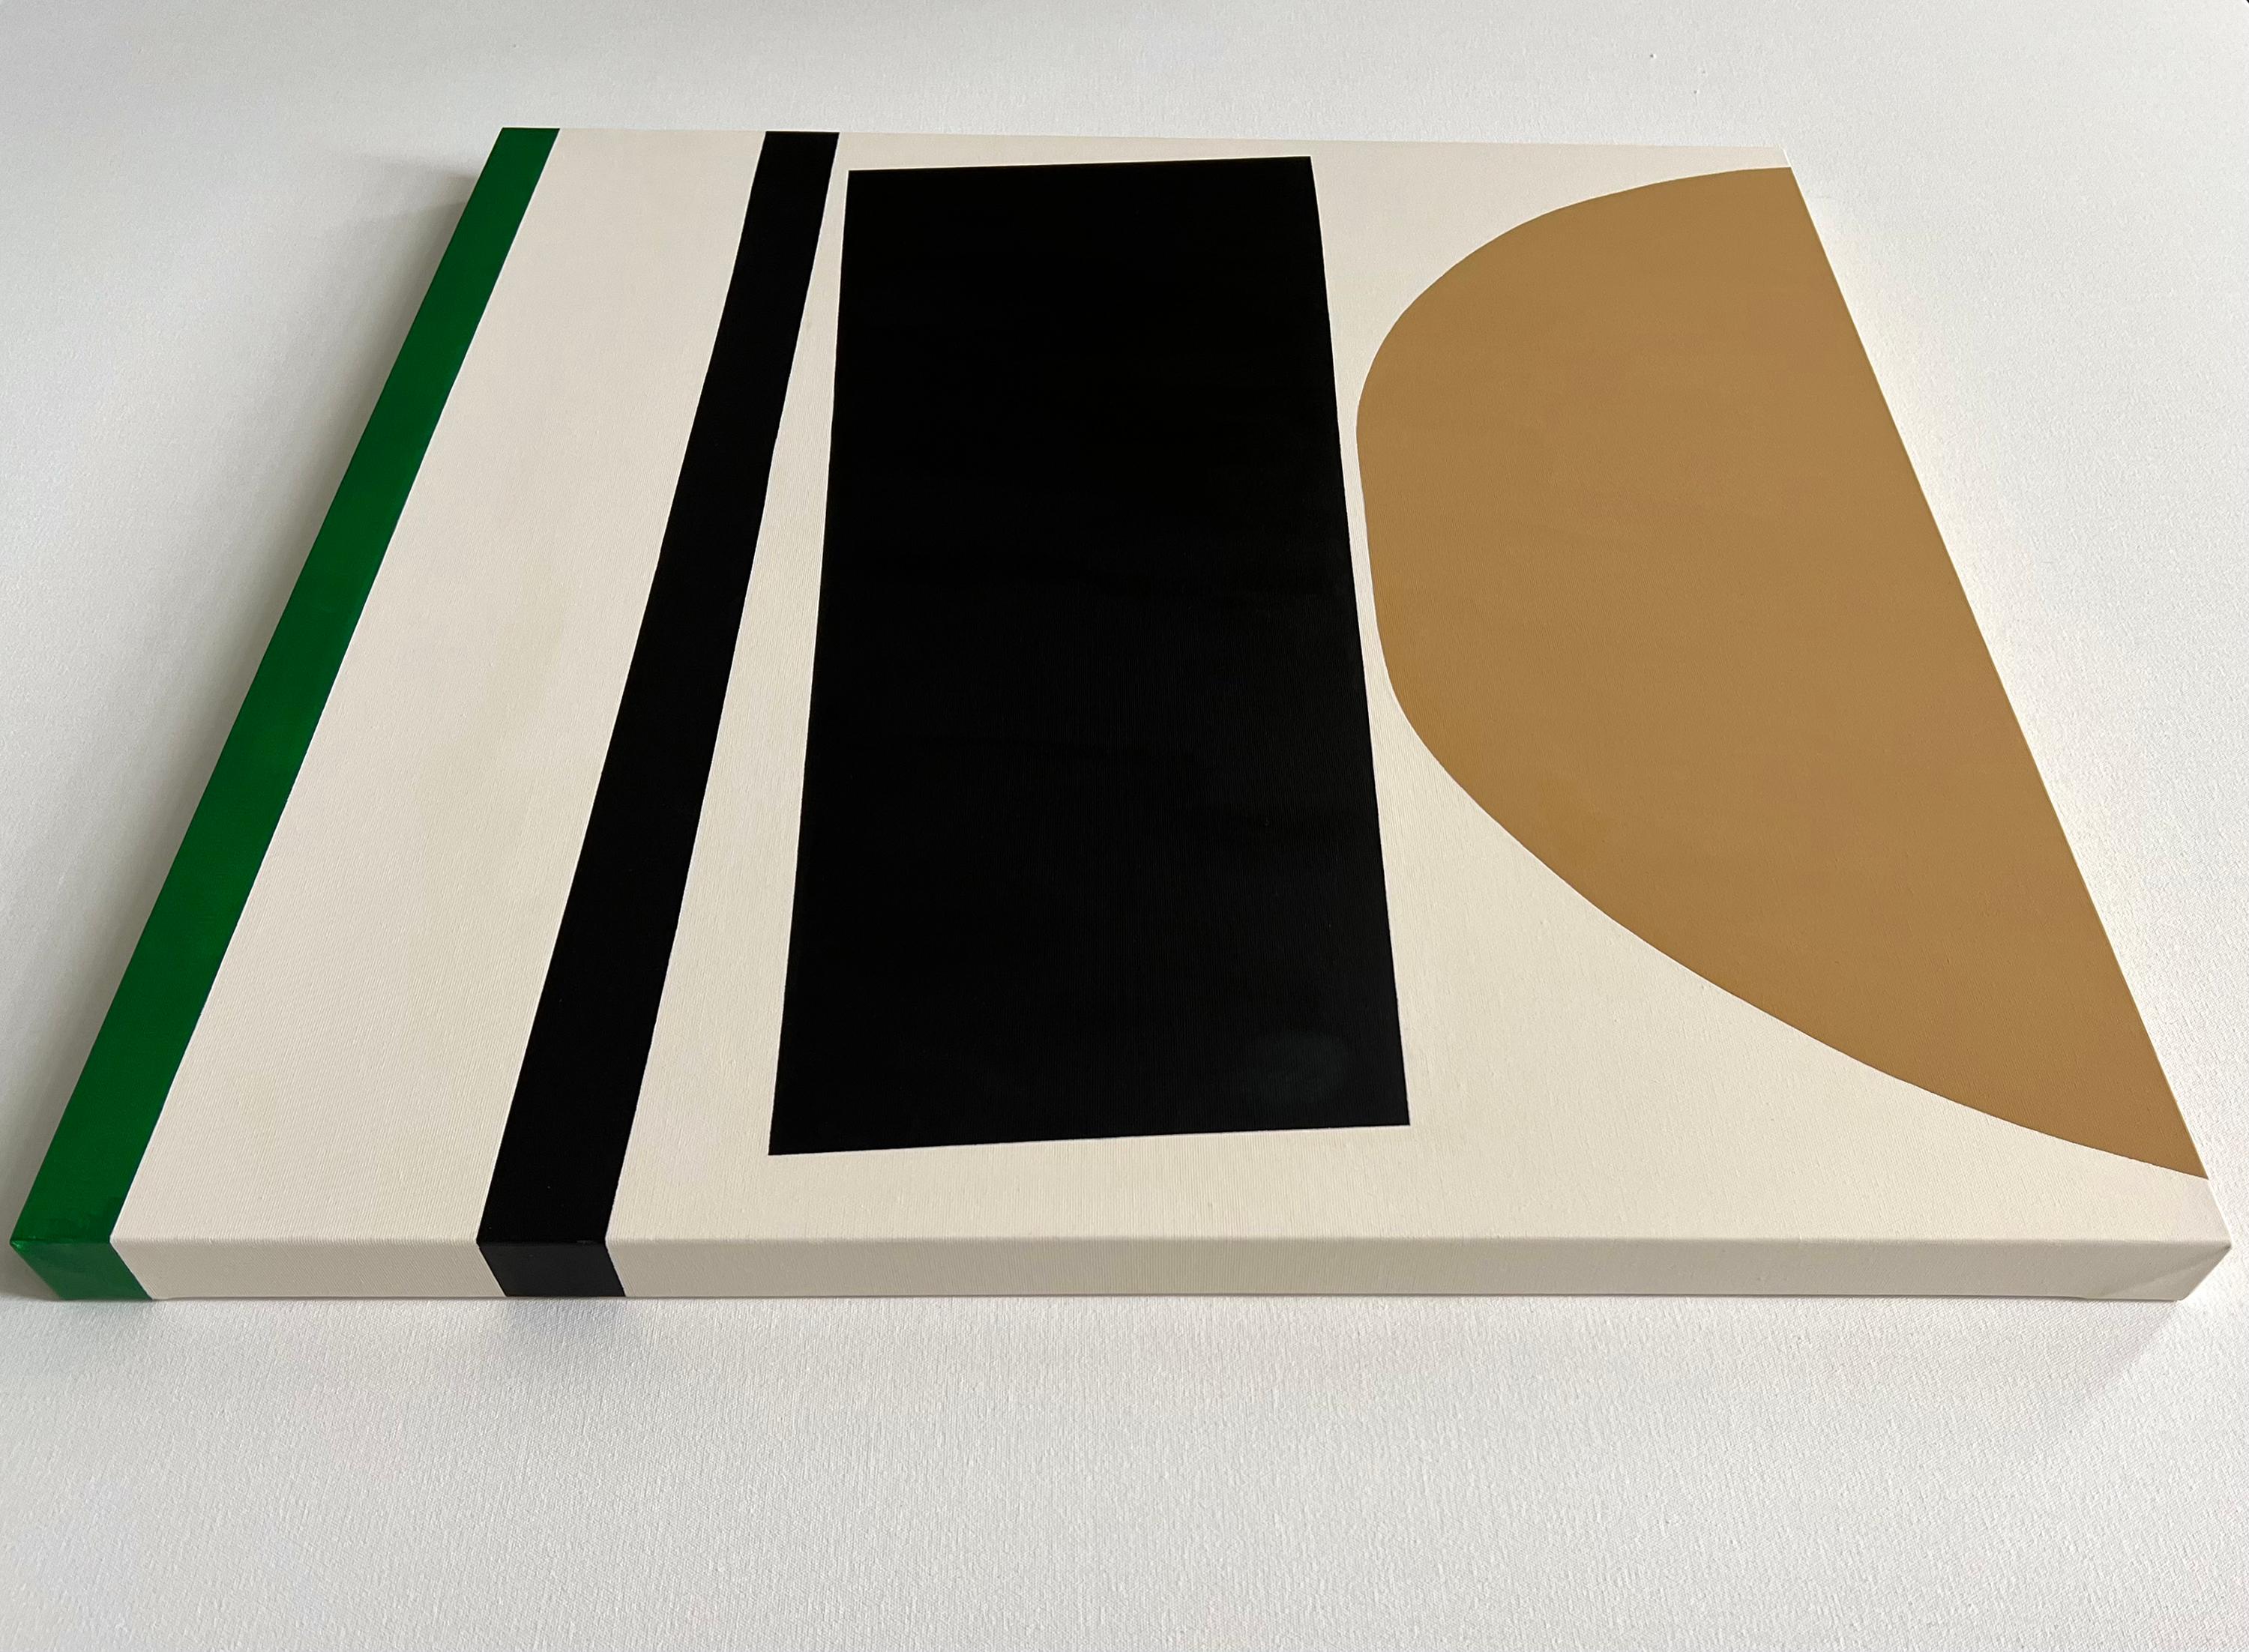 This abstract painting from new Series “Geoforms” is inspired by minimalism, modern art and hard edge.
Work is signed, dated and tilted by Artist on the back.
This work will be shipped in a box. The sides are painted, so additional framing is not